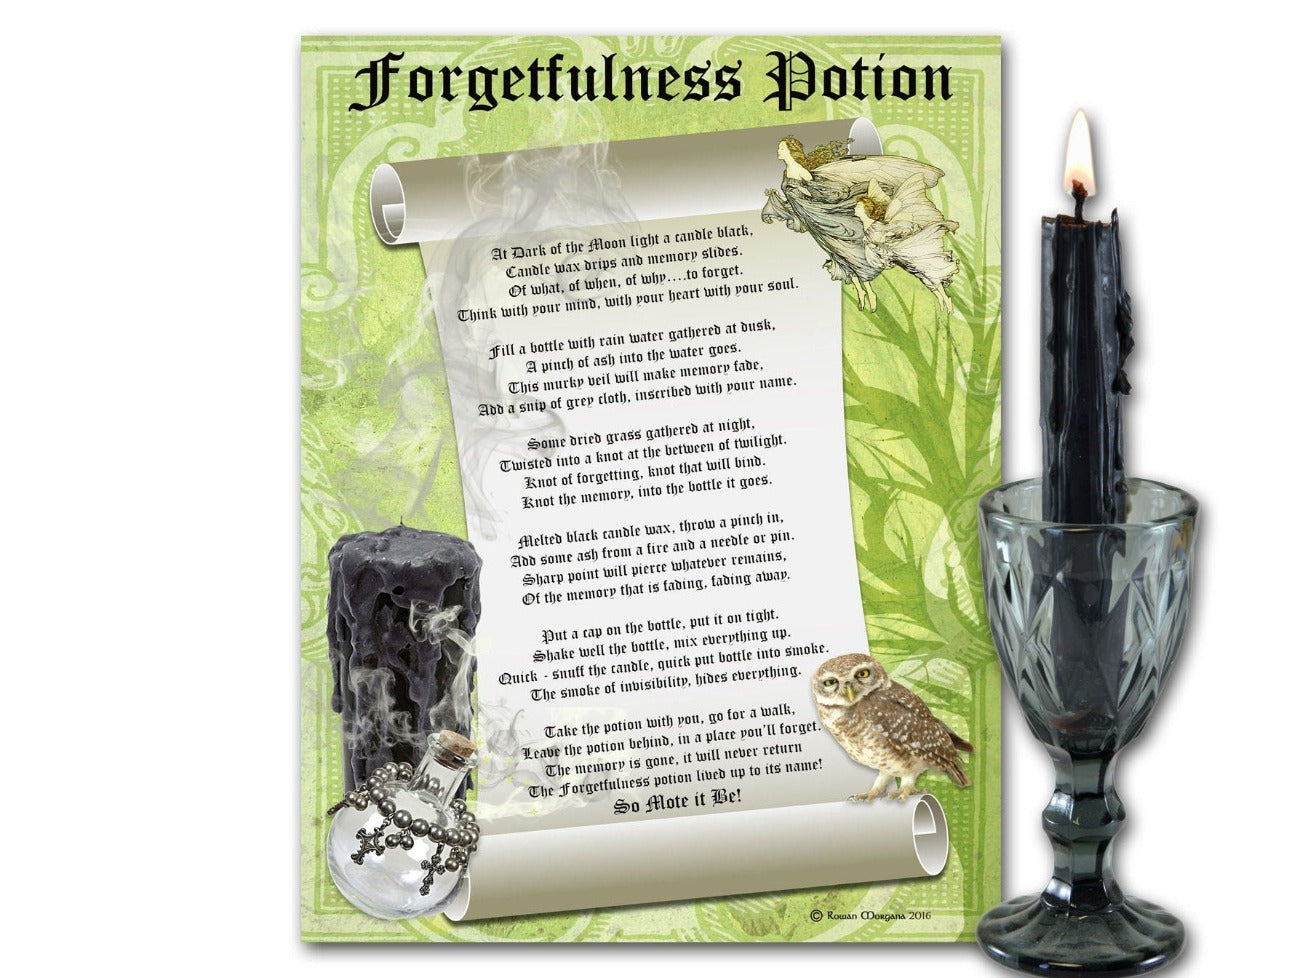 FORGETFULNESS POTION, Spell to Banish Memories, Wicca Witch Potion Recipe Magic, Memory Loss Brew to Forget, Witchcraft Apothecary Elixir - Morgana Magick Spell